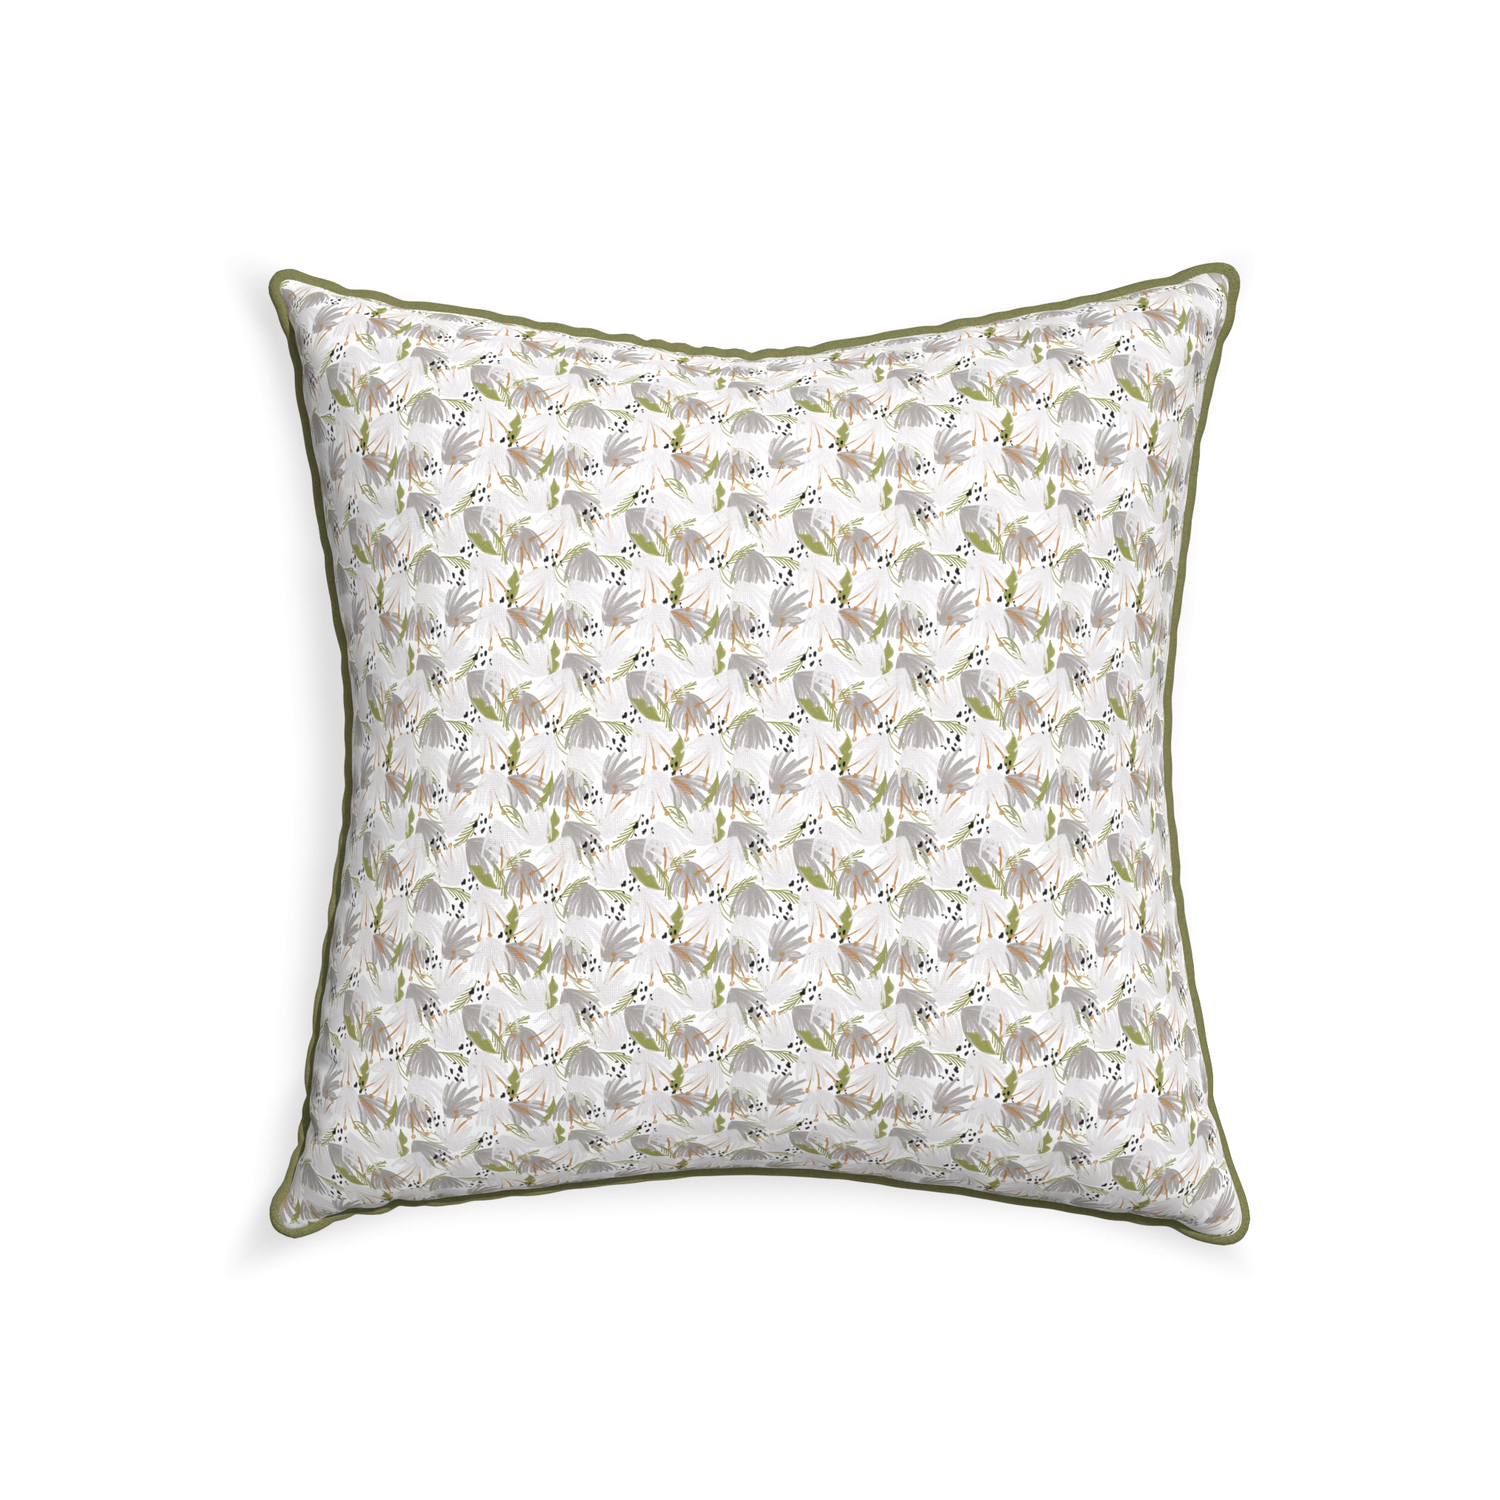 22-square eden grey custom pillow with moss piping on white background